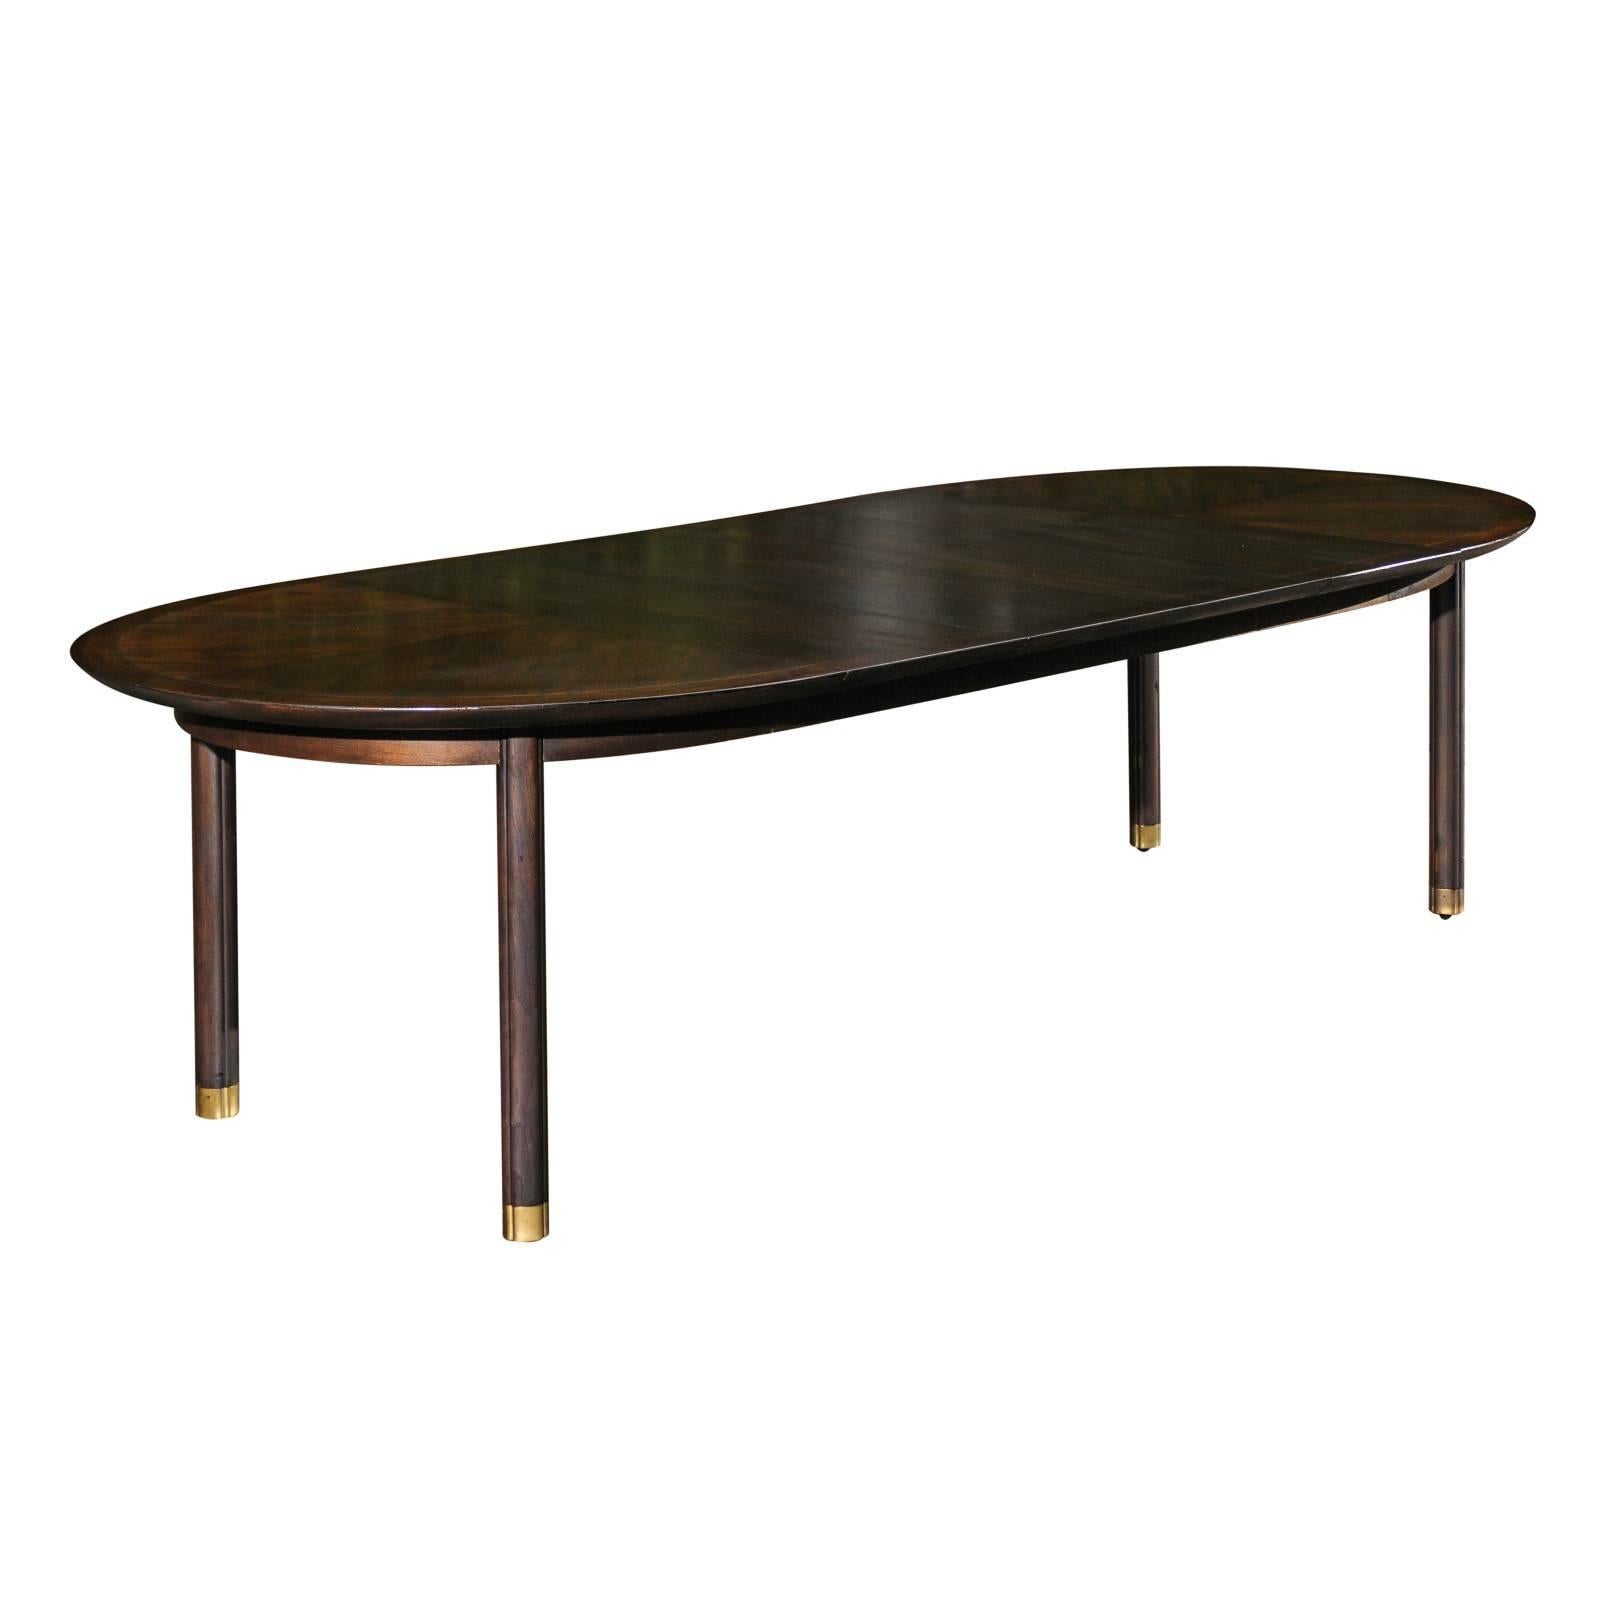 Majestic Elliptical Walnut Dining Table by Michael Taylor for Baker, circa 1958 For Sale